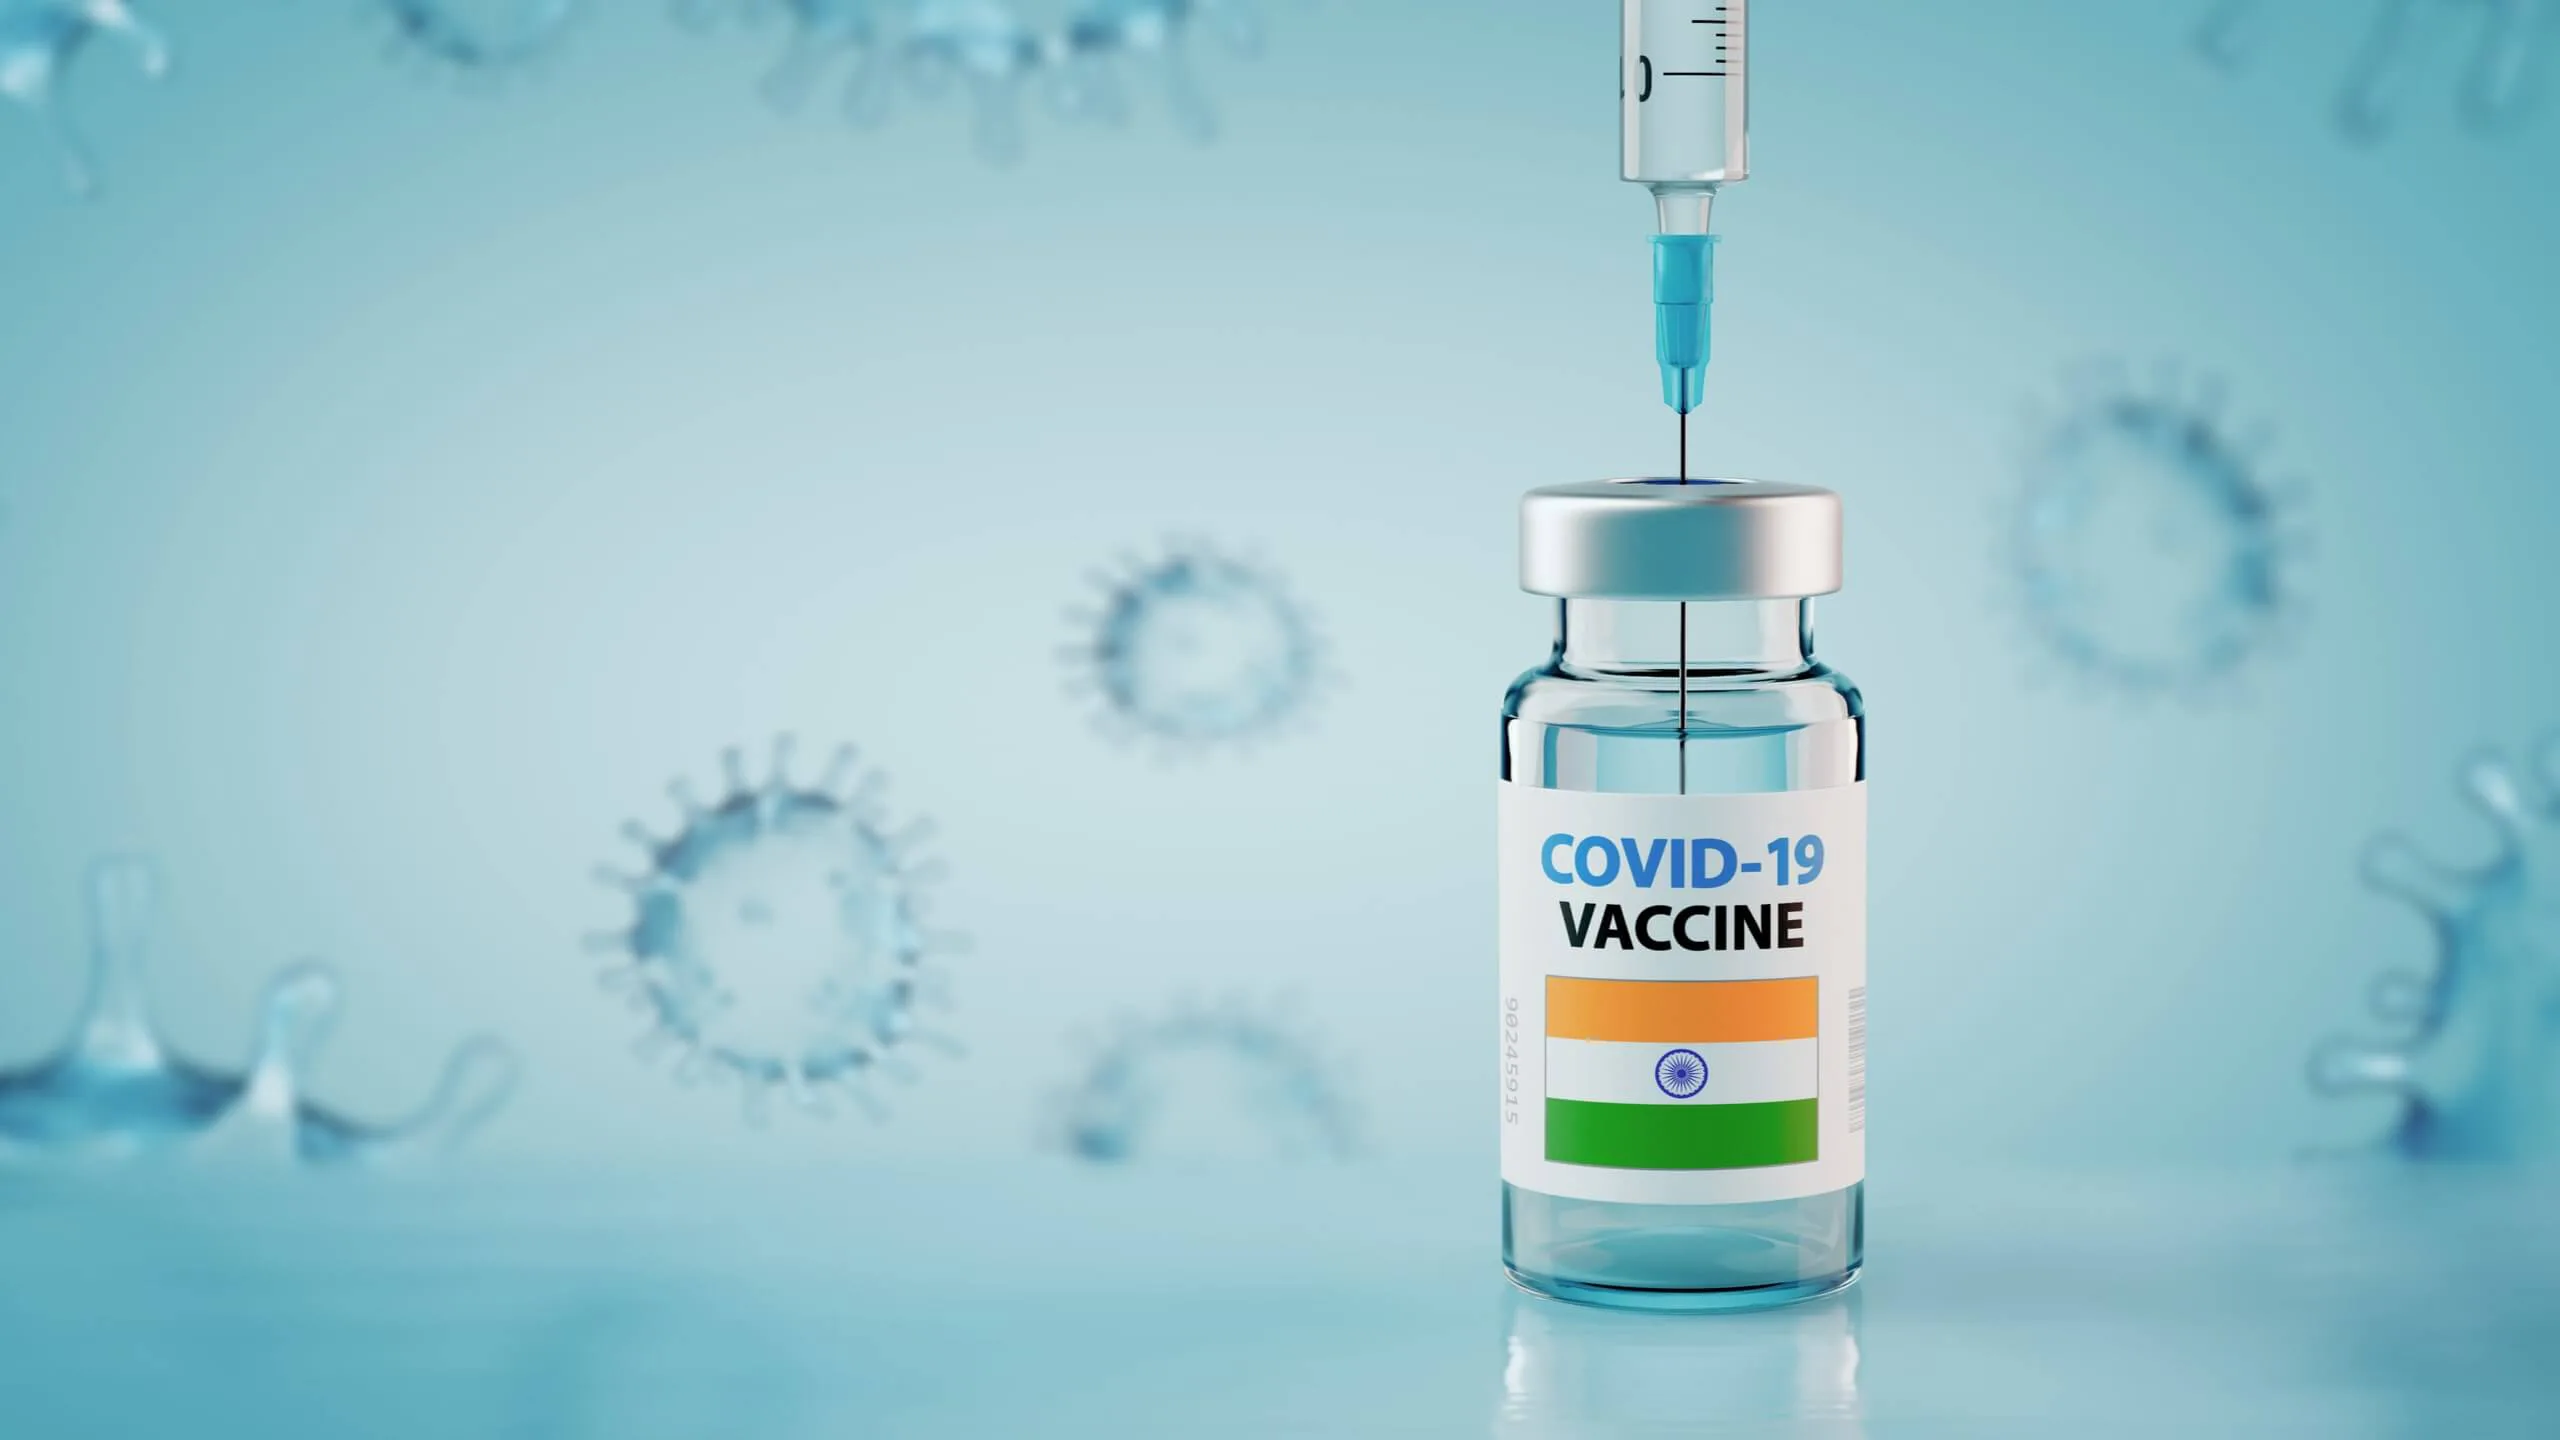 The COVID Vaccine to Rescue! Real Estate Sector to Get a Boost